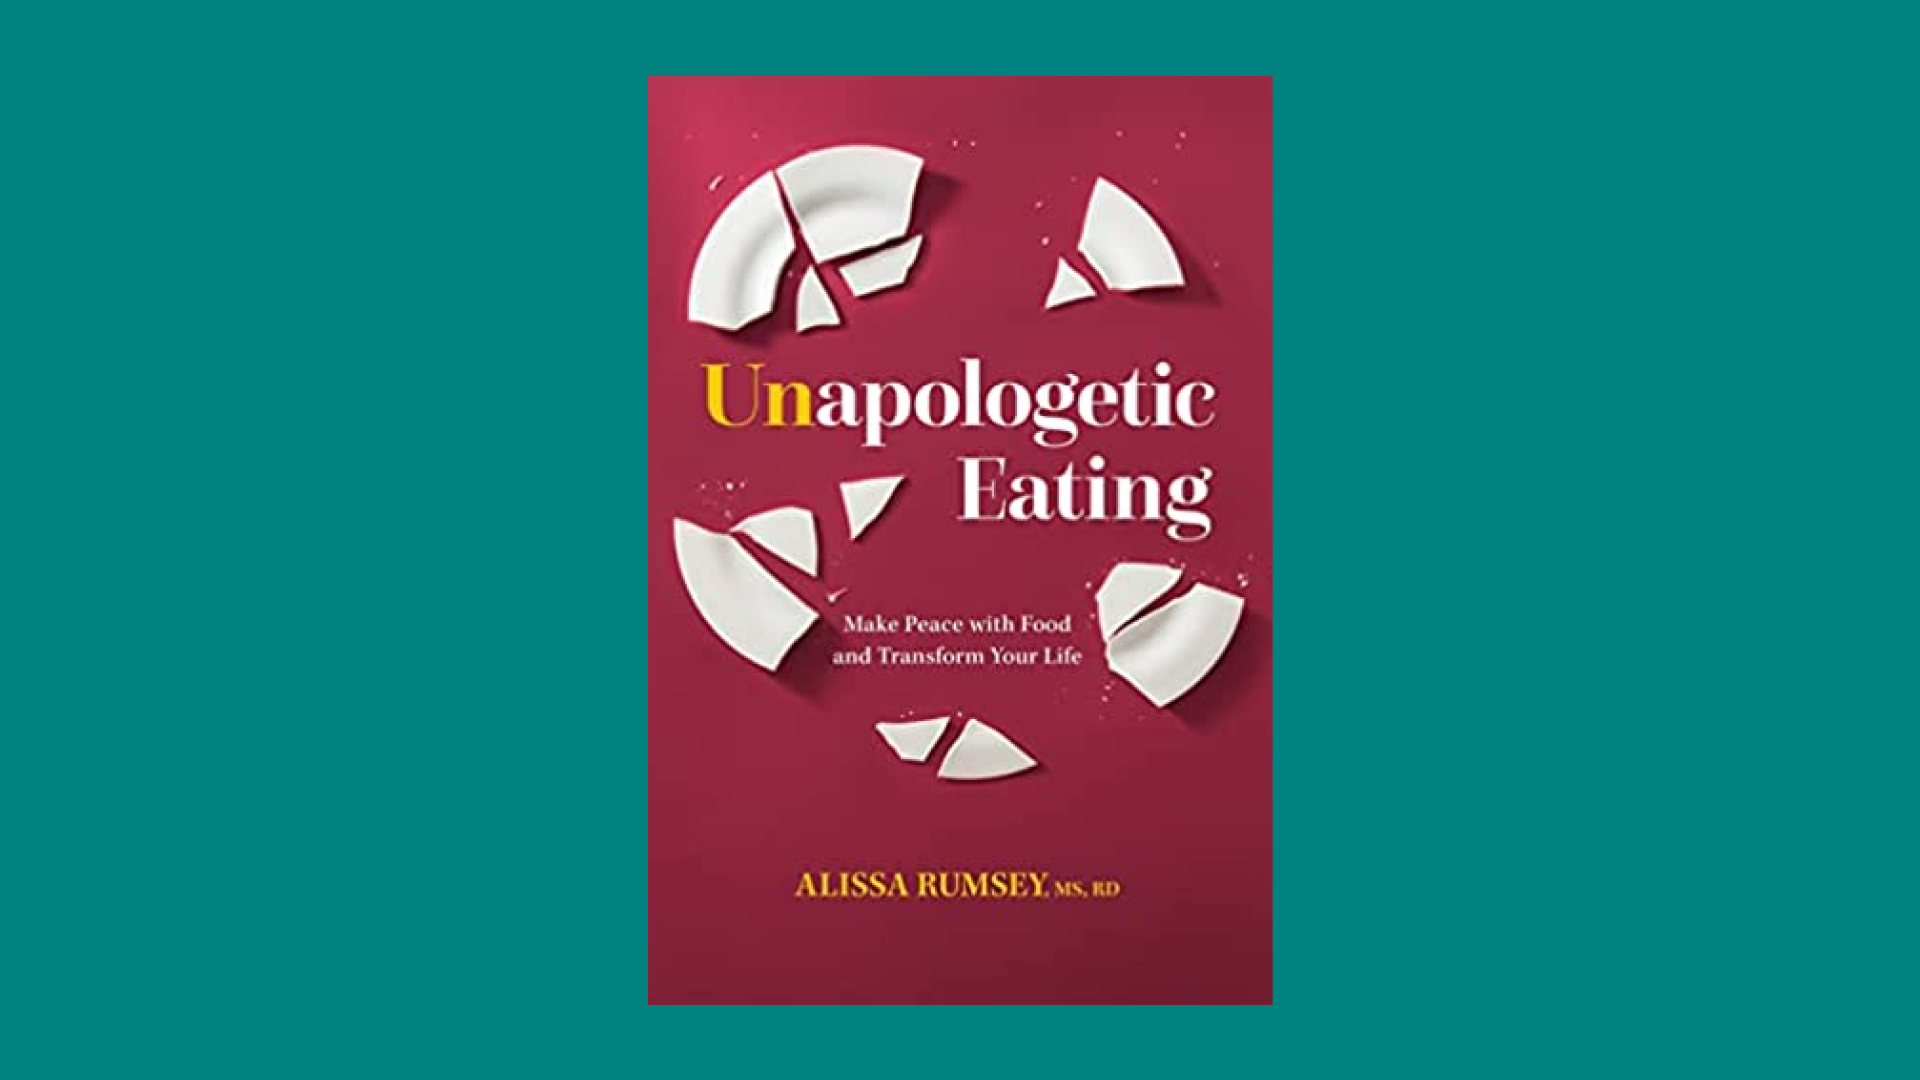 “Unapologetic Eating: Make Peace with Food and Transform Your Life” by Alissa Rumsey - Intuitive Eating